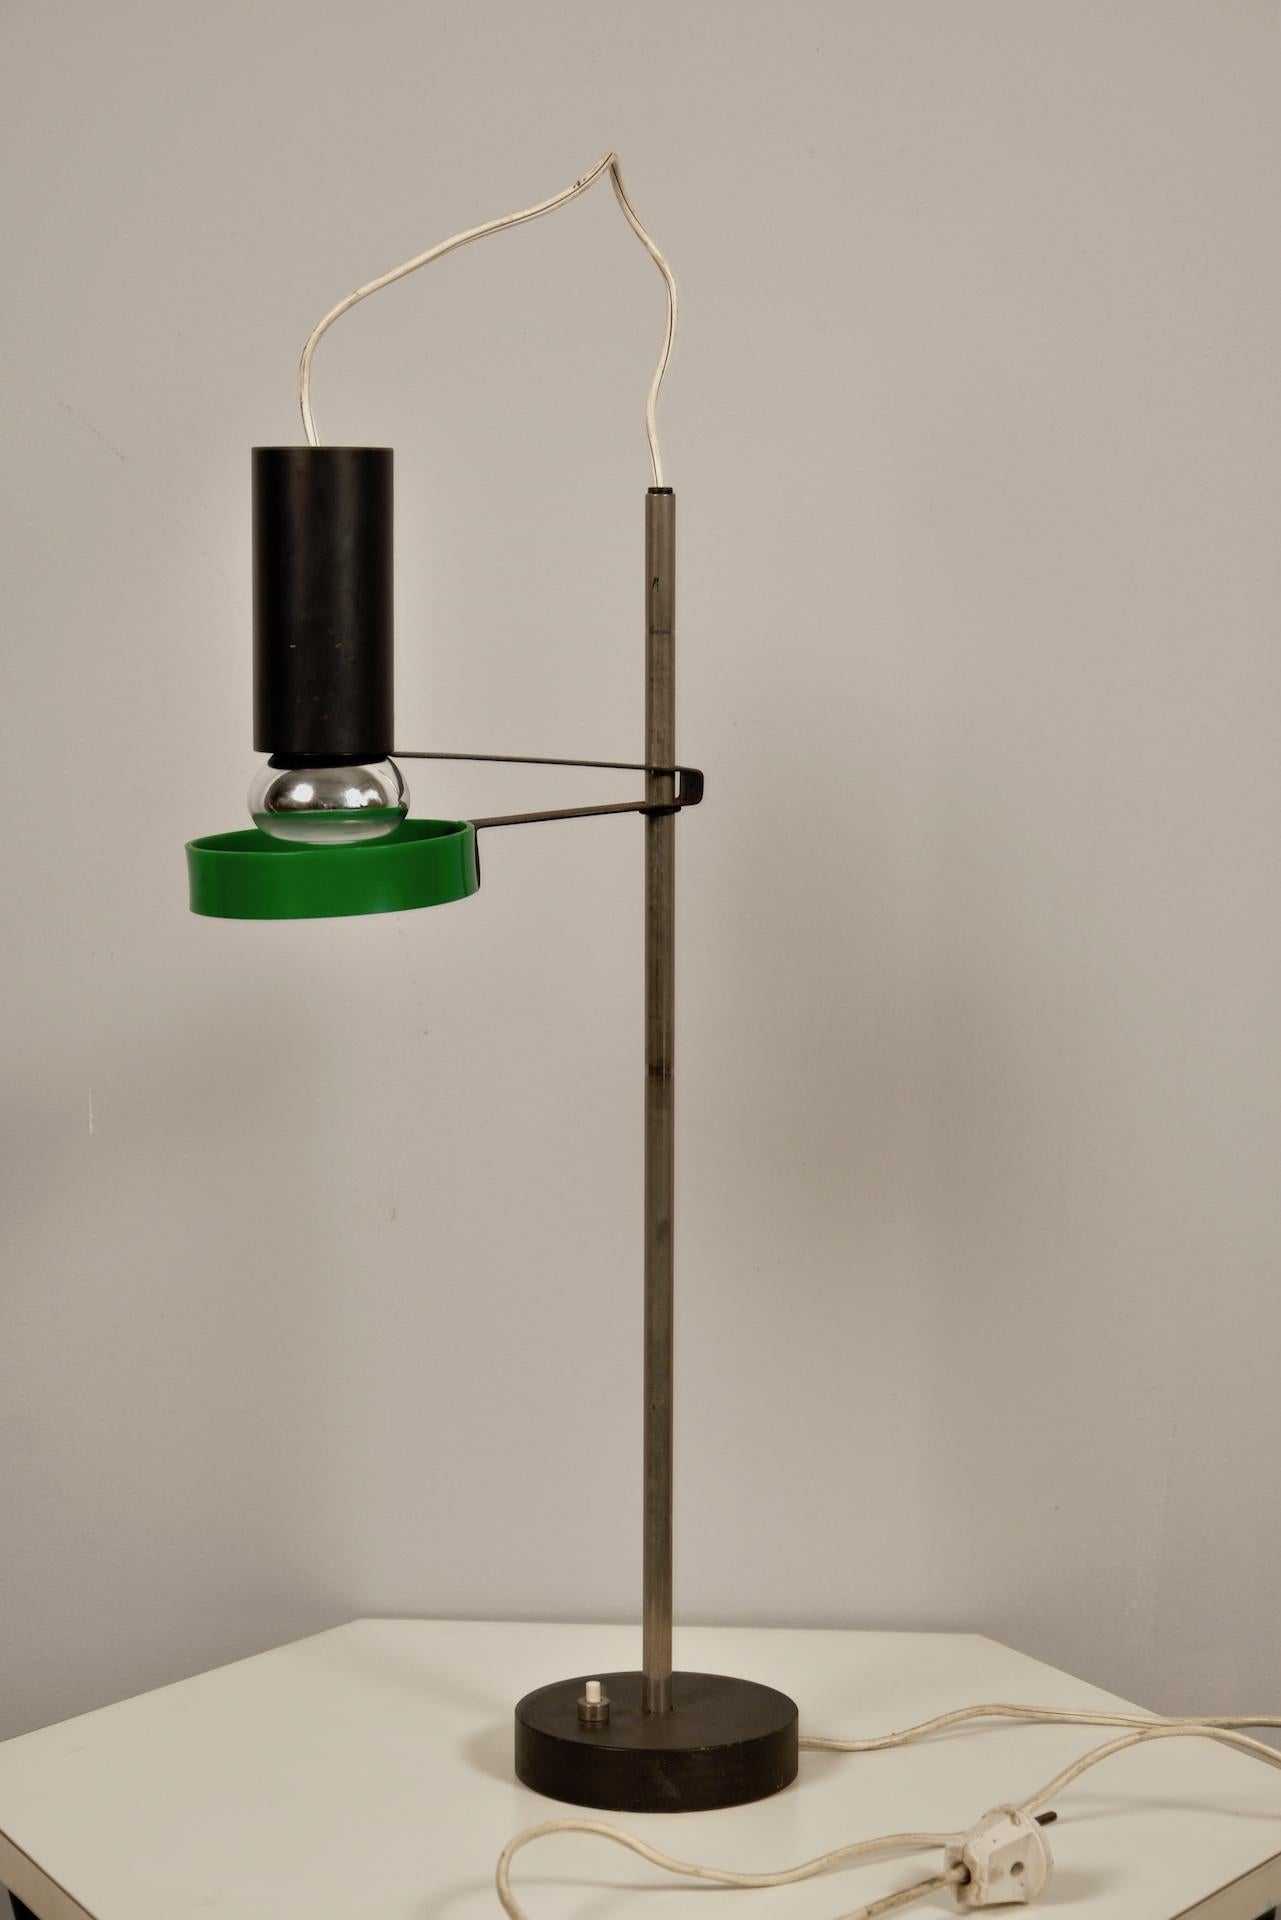 Model 565 a direct light table lamp designed in 1956, has distinctive steel spring that holds the spotlight reflector.